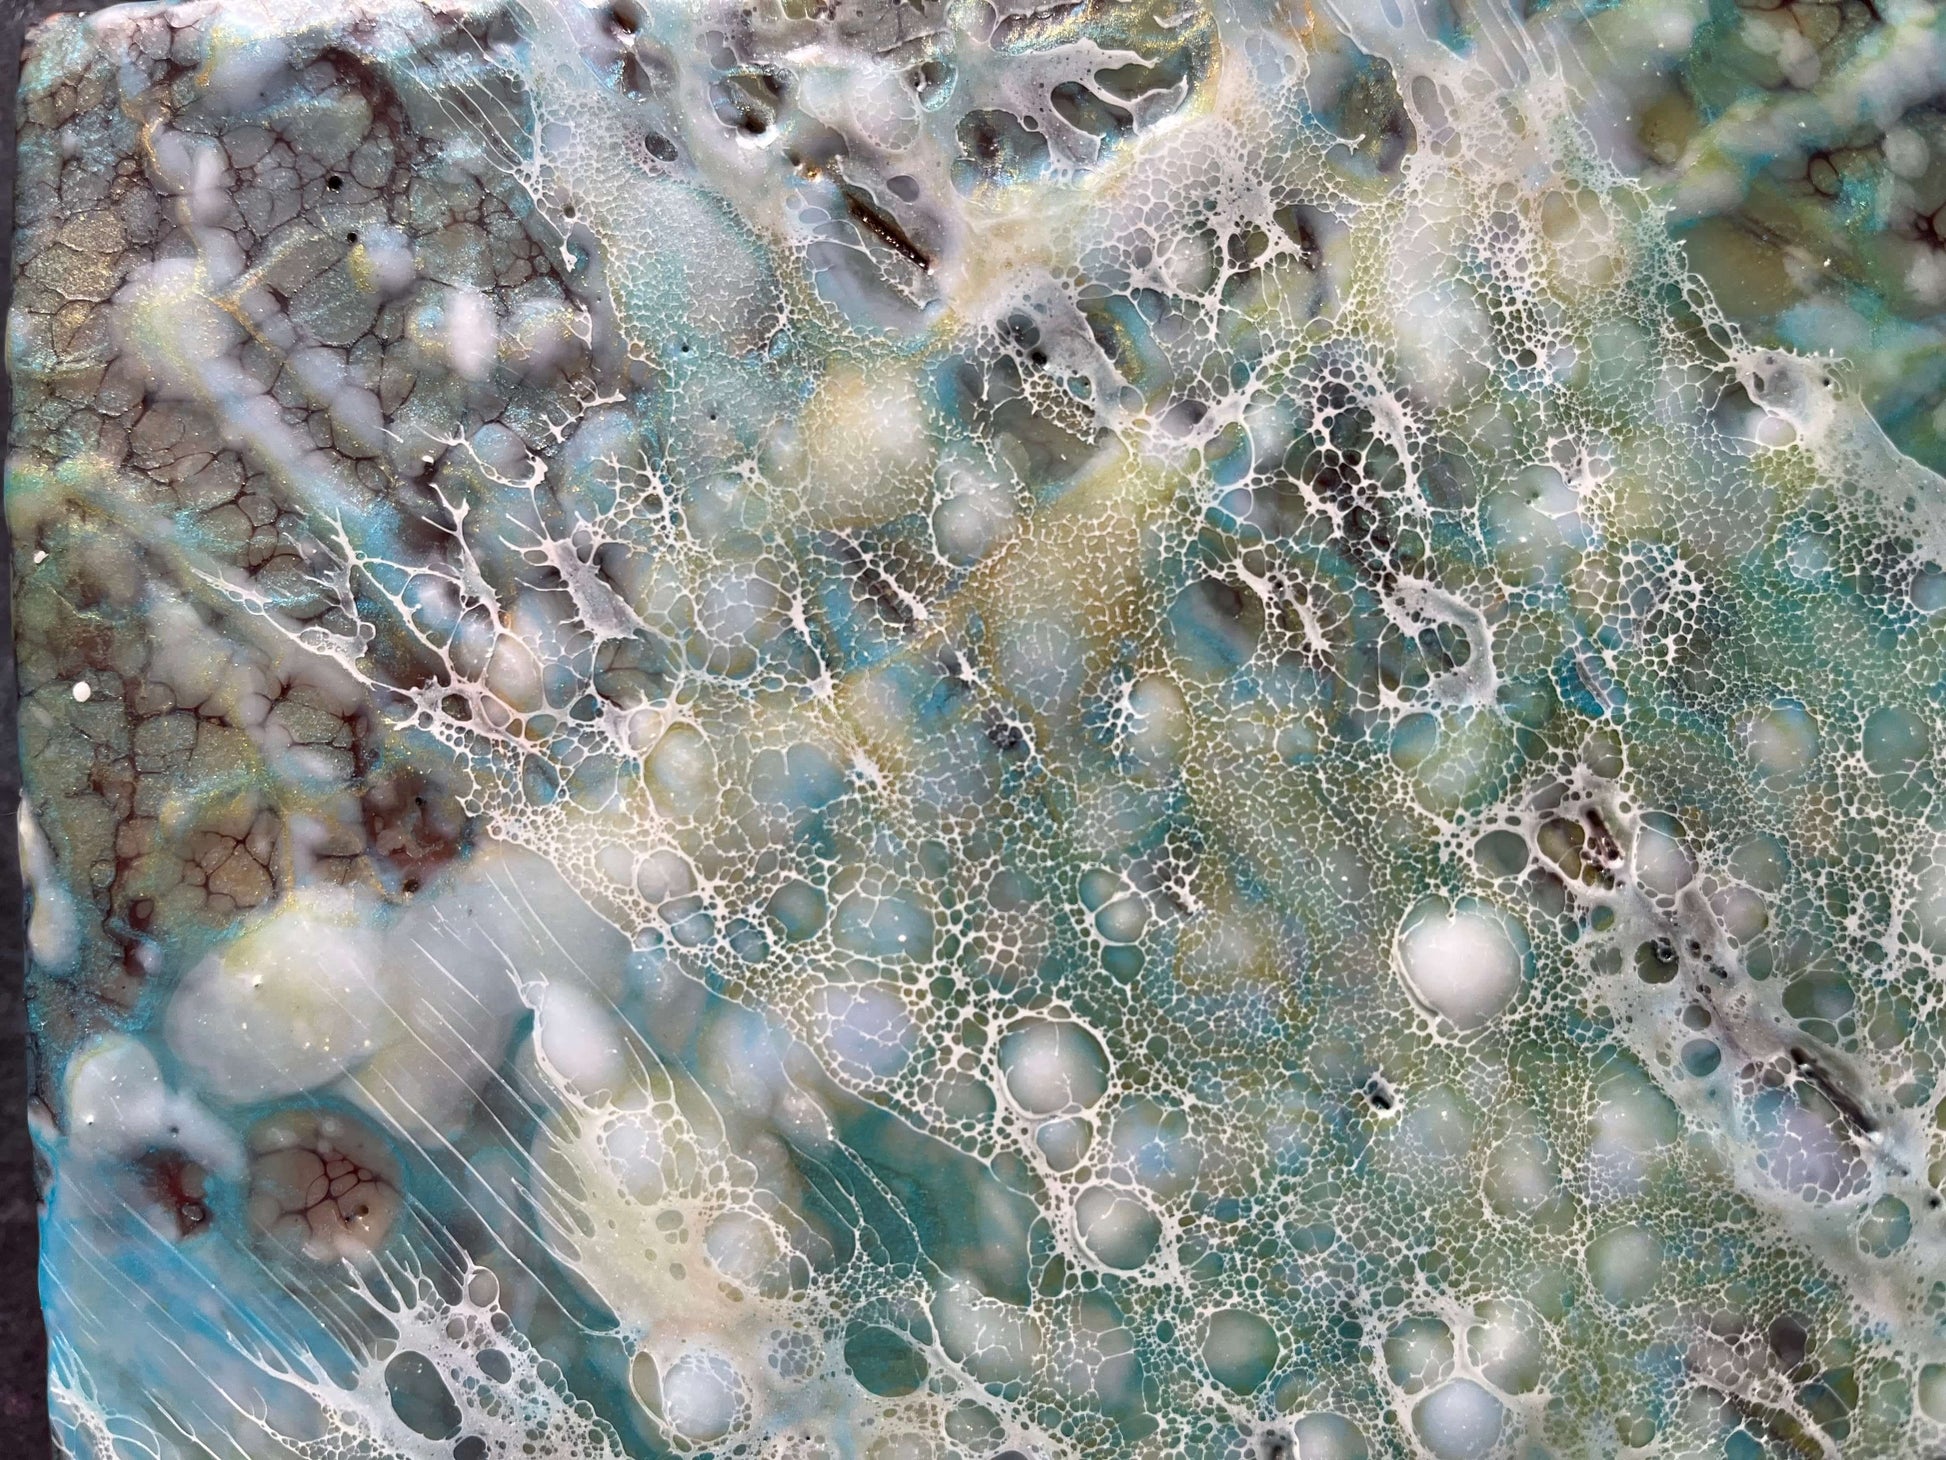 Close up.Abstract Encaustic Painting, 16x20in. Created with beeswax, damar resin, dry pigments and shellac on cradled wood panel. This painting is bursting with blues, greens and variations of earthy pigments. The delicate lace like texture of shellac mimics rain drops hitting the ground and creating tiny bubbles on the surface. Hanging hardware is included